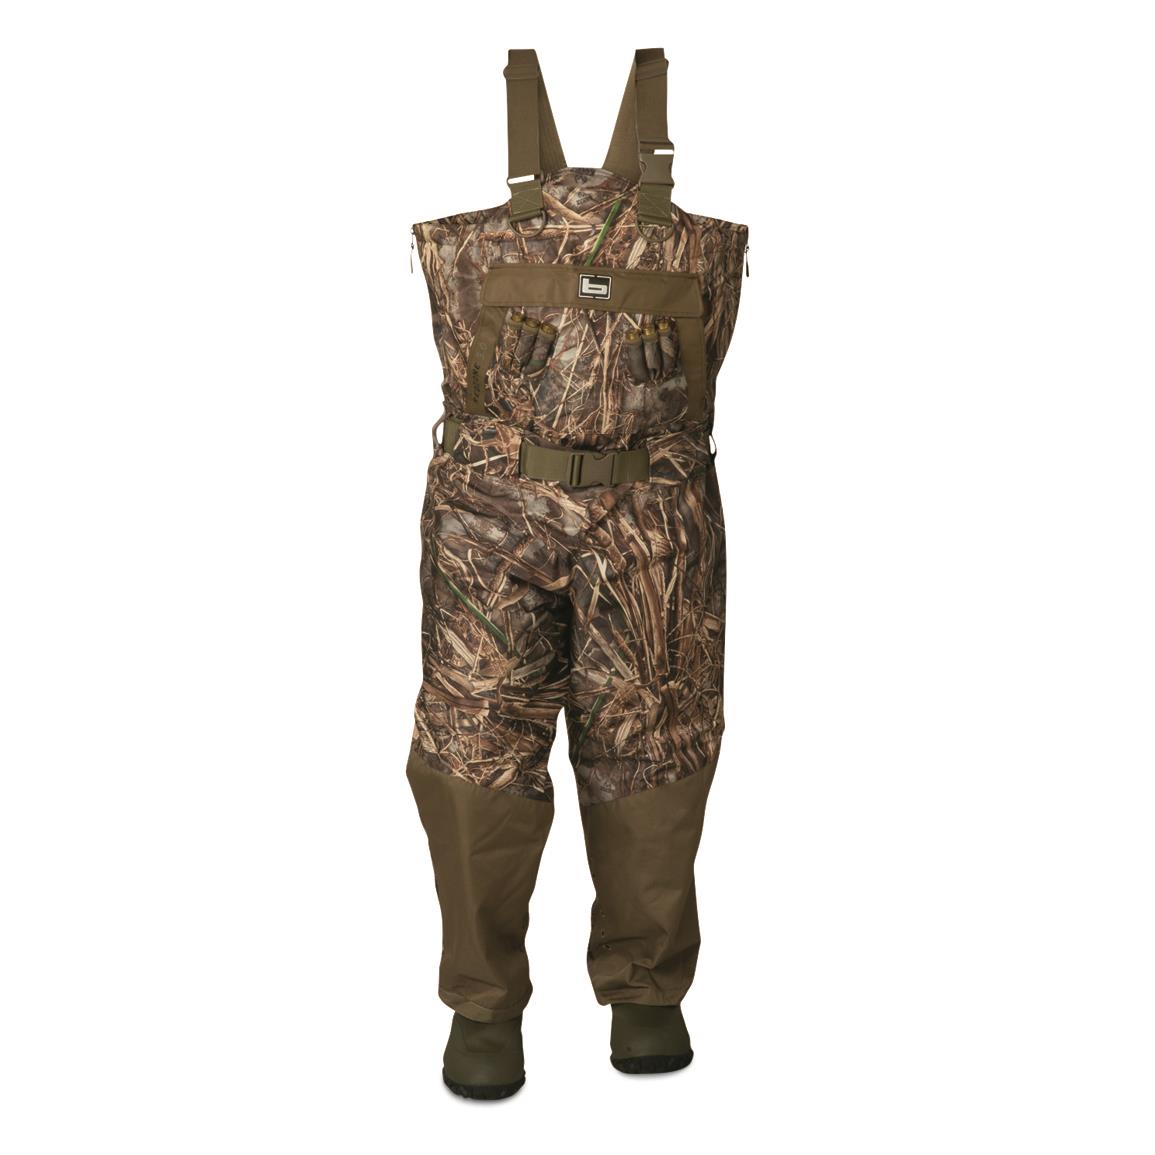 Banded RedZone 3.0 Breathable Bootfoot Chest Waders, 1,600-gram - 730063,  Waders at Sportsman's Guide